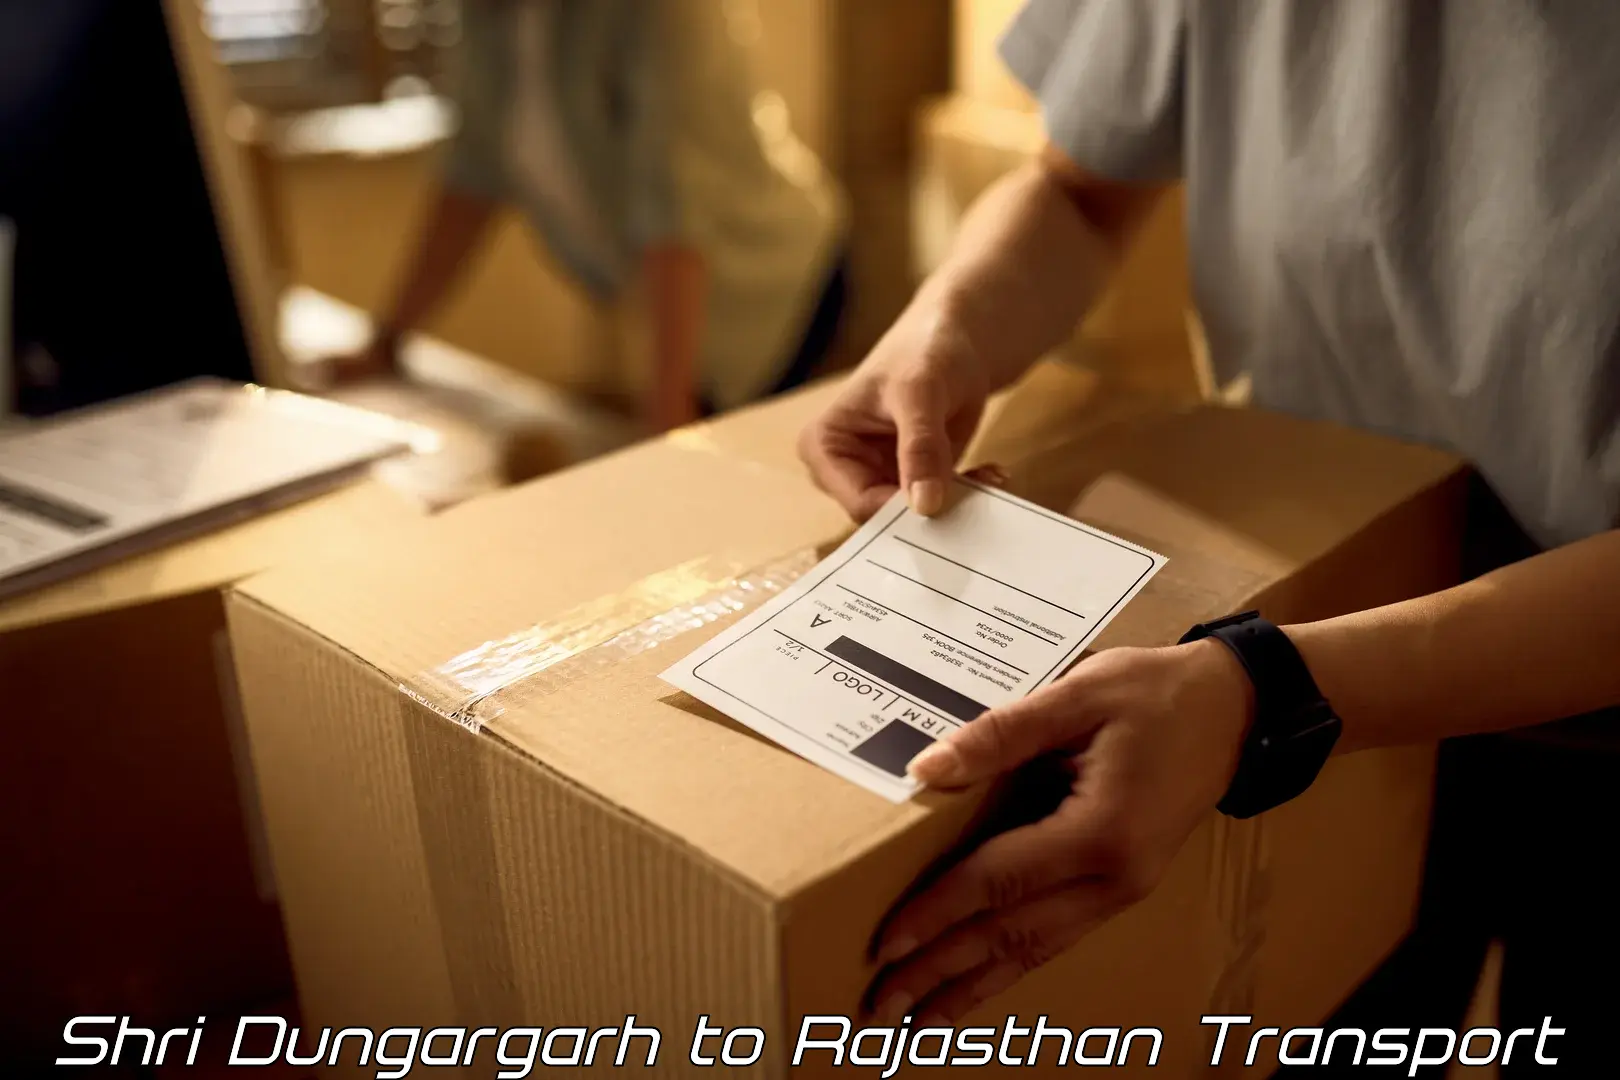 Delivery service Shri Dungargarh to Rajasthan